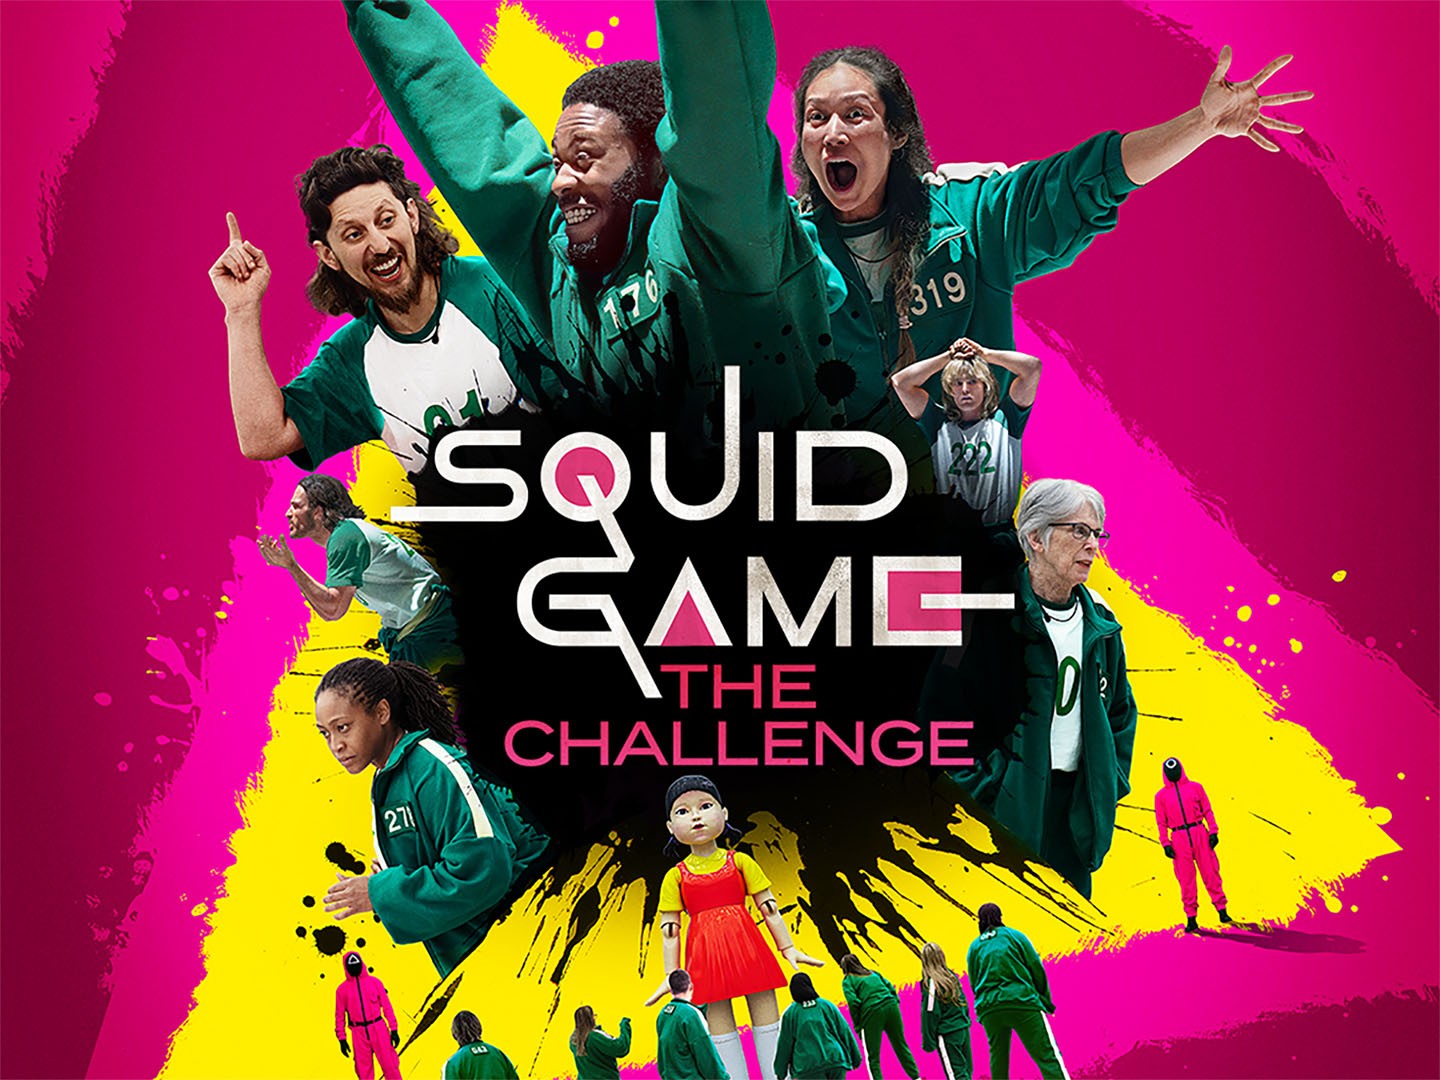 Squid Game: The Challenge' should never have been green-lit in the